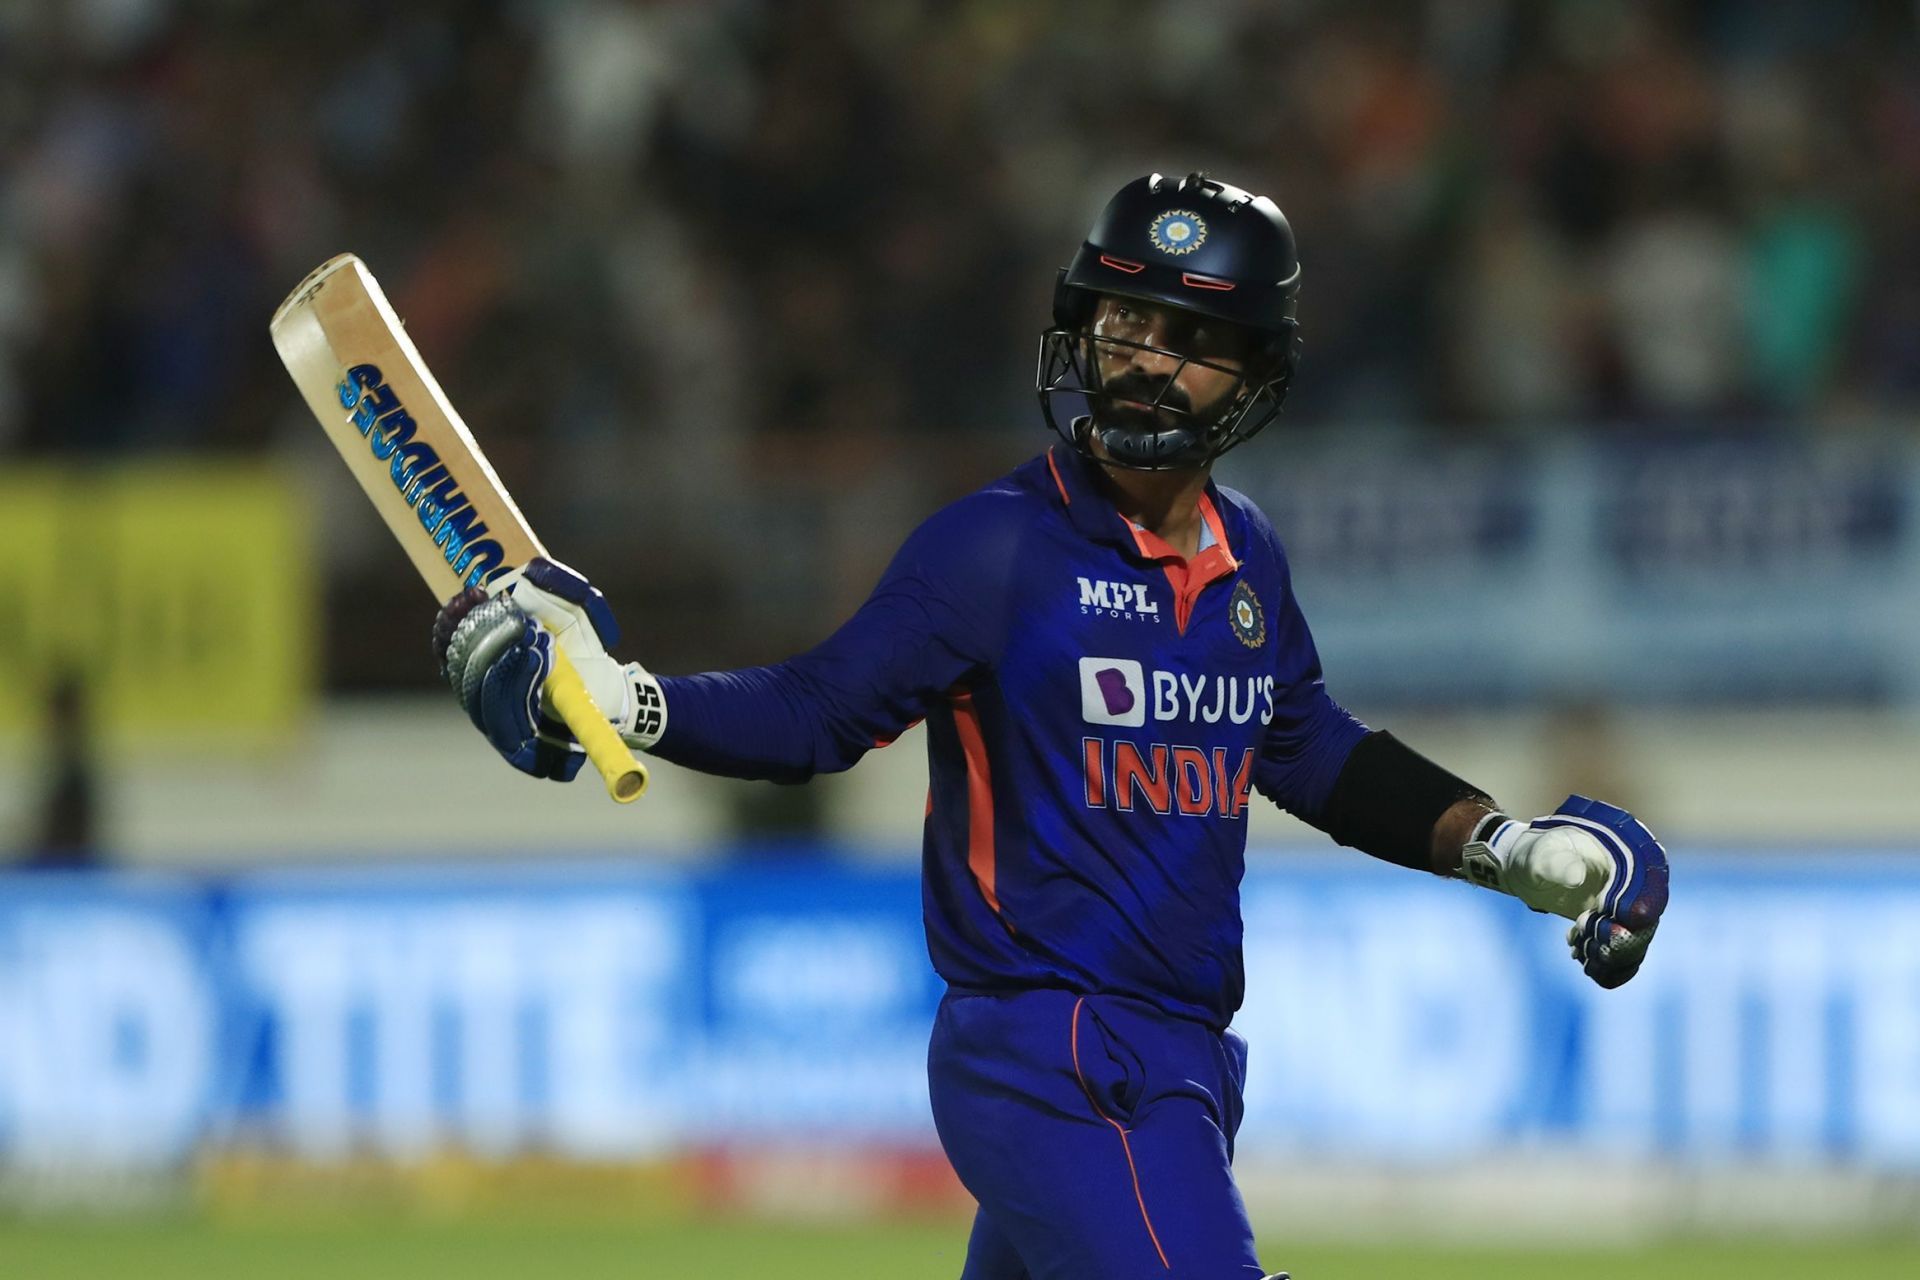 Dinesh Karthik gave a good account of himself as a finisher in the T20I series against South Africa